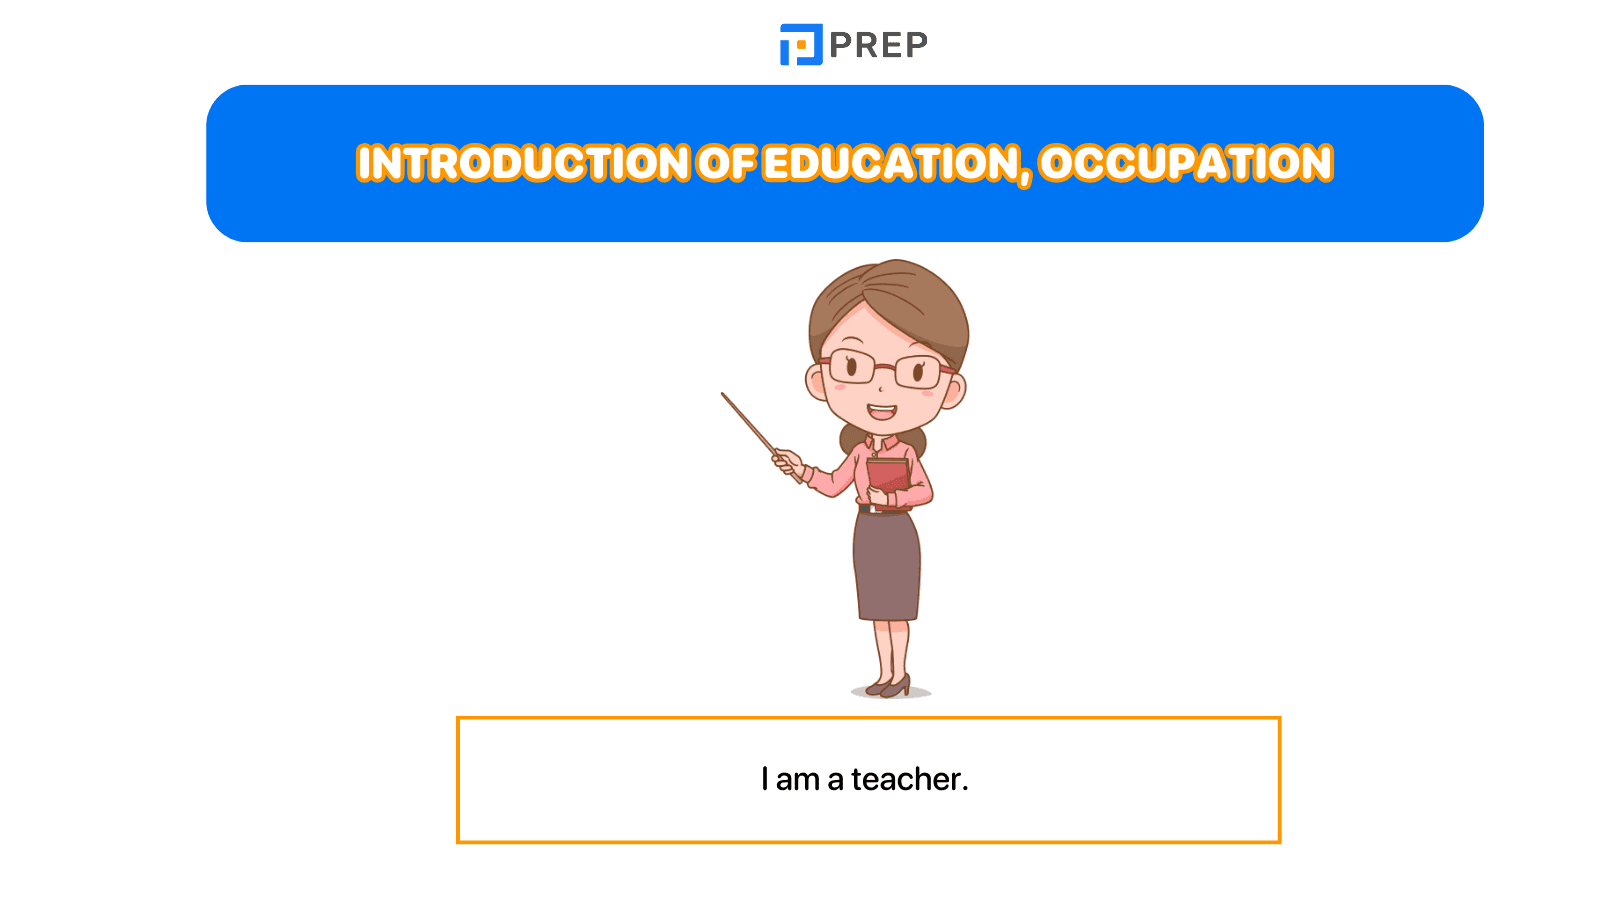 Introduction of education, occupation